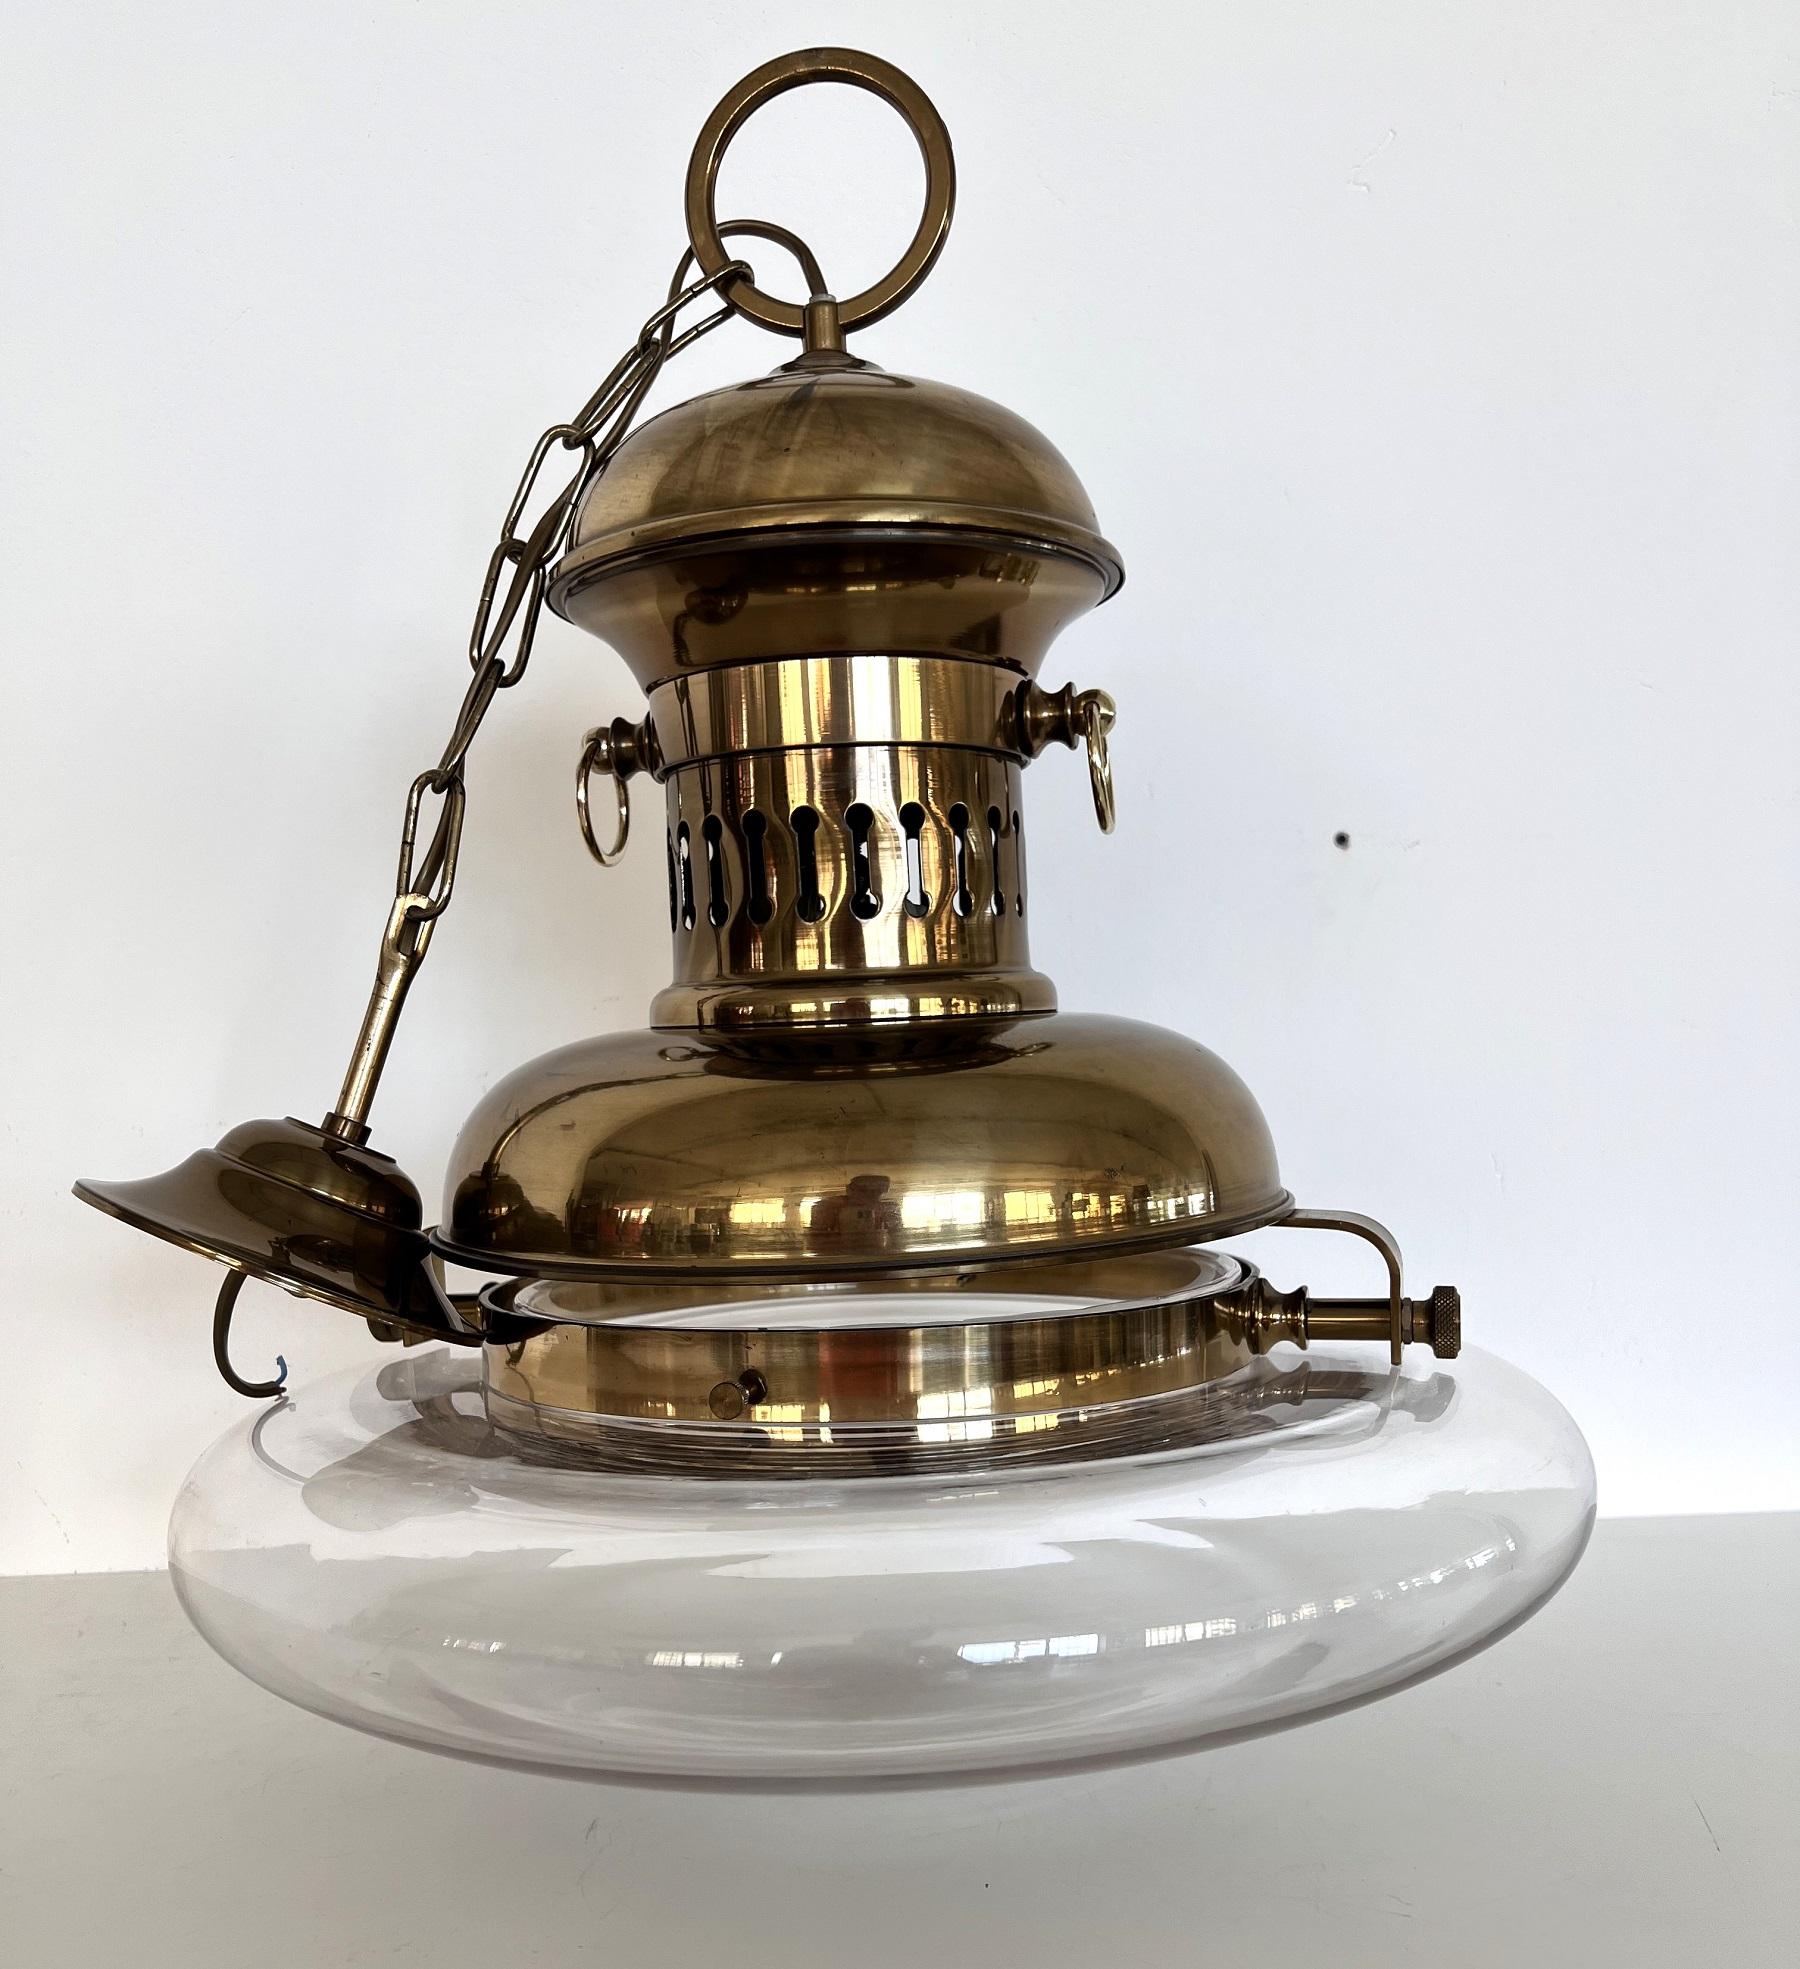 Italian Brass and Glass Pendant Lamp or Lantern in Nautical Style, 1970s For Sale 9